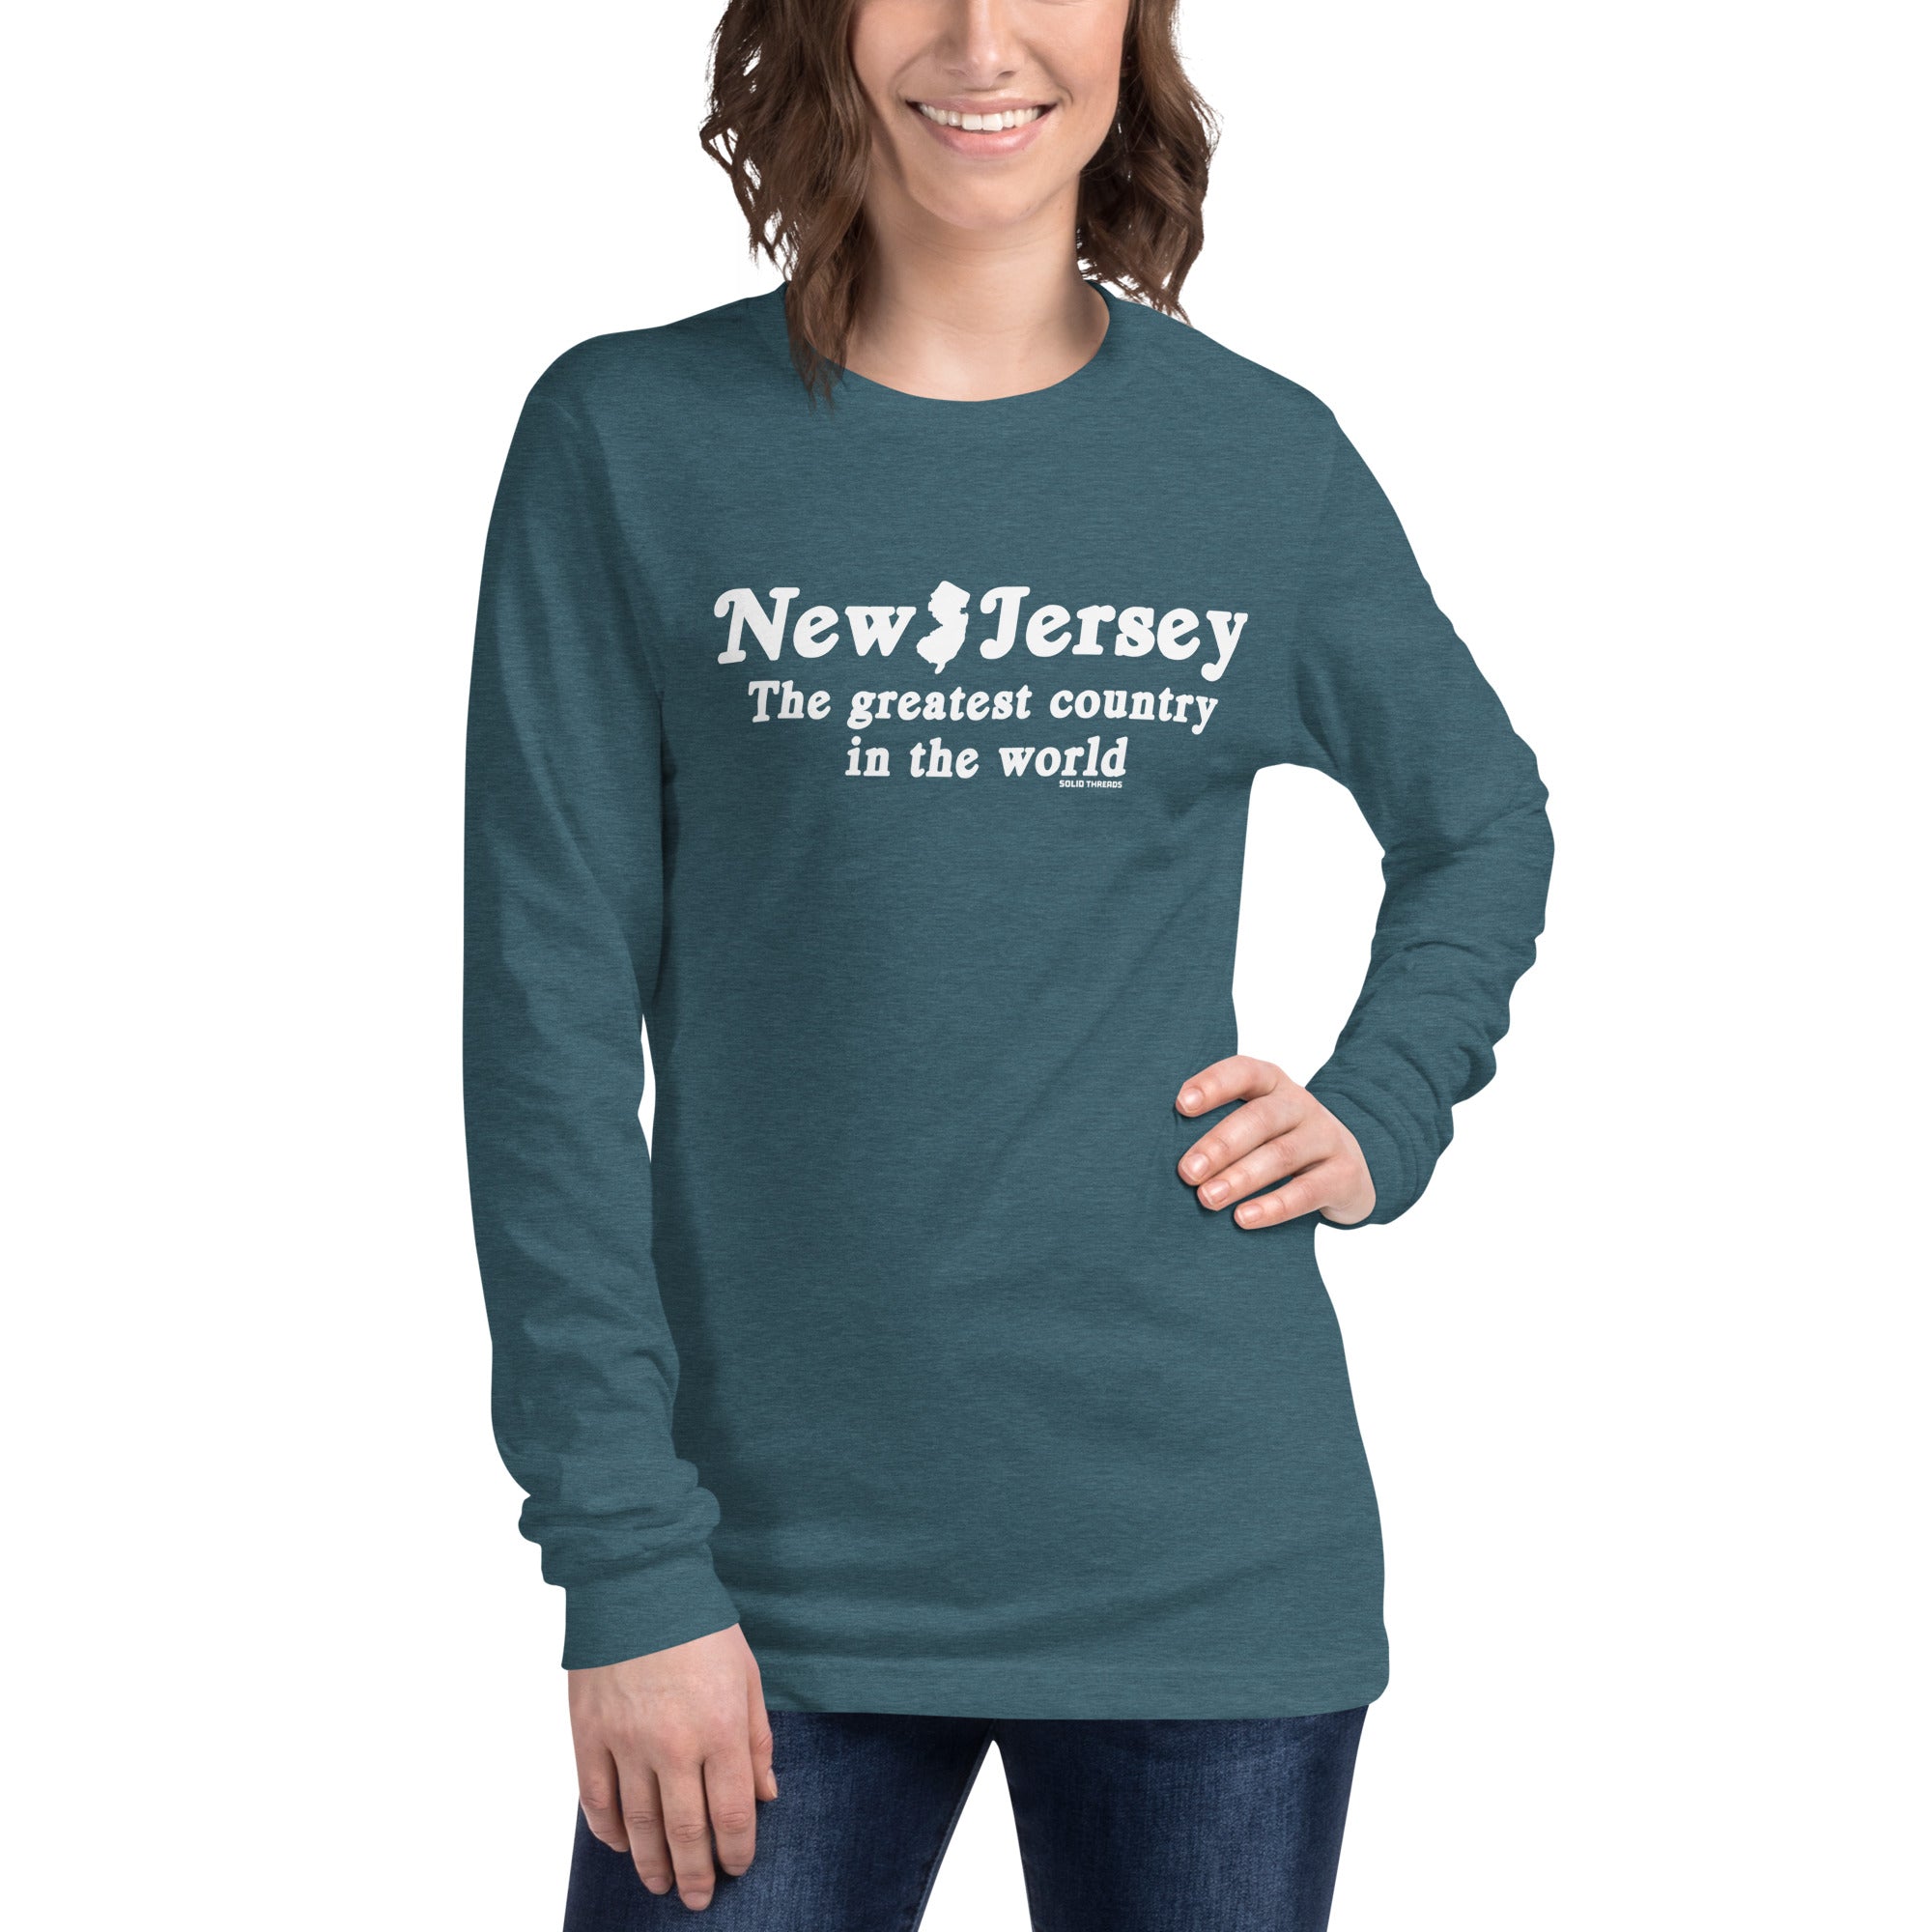 New Jersey The Greatest Country In The World Vintage Teal Long Sleeve T Shirt | Funny Garden State Graphic Tee on Model | Solid Threads